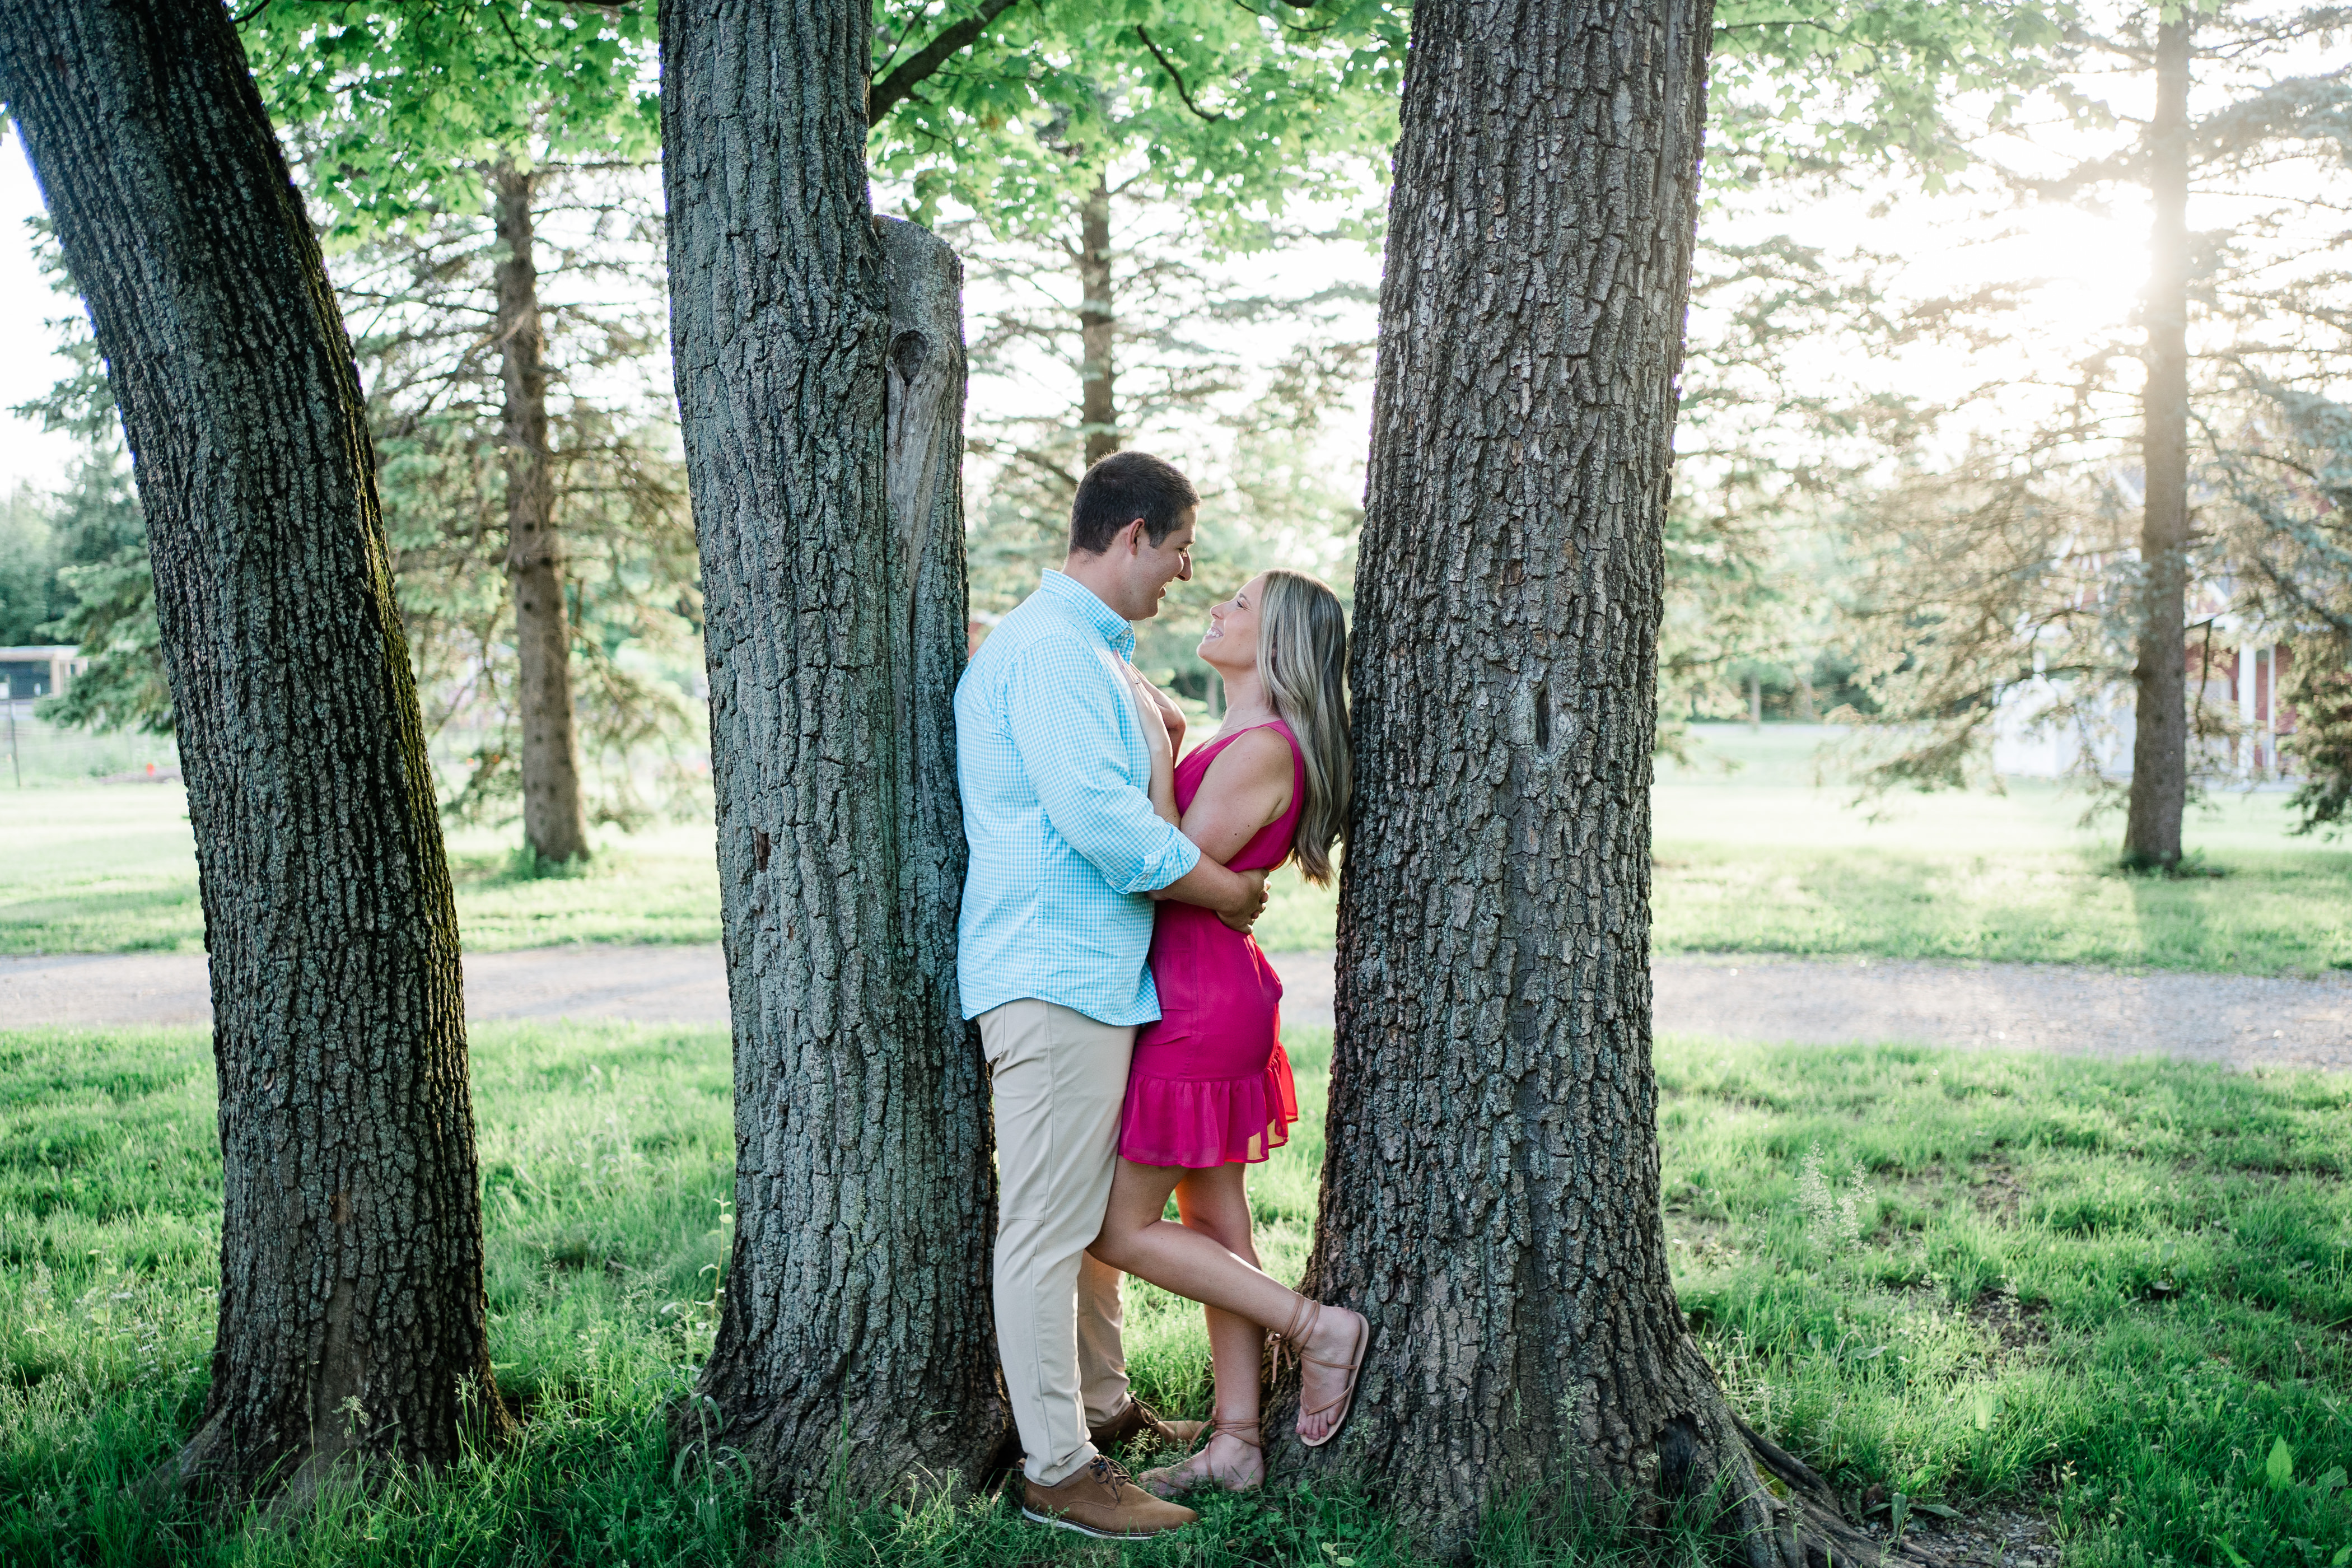 Fort Wayne wedding photographer captures newly engaged couple kissing in between trees